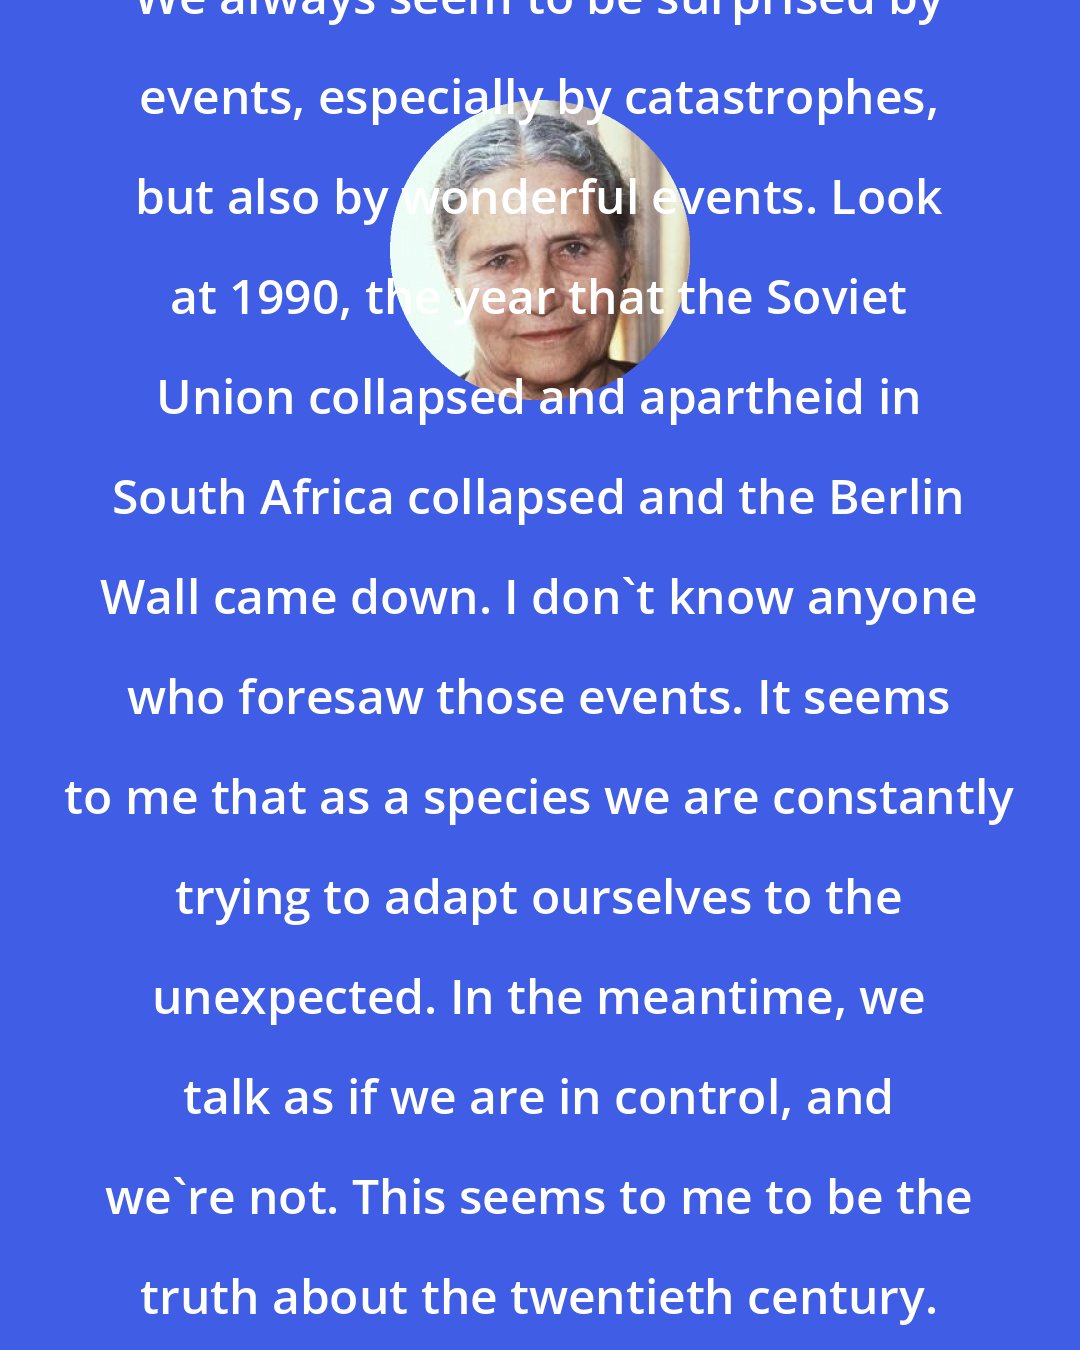 Doris Lessing: We always seem to be surprised by events, especially by catastrophes, but also by wonderful events. Look at 1990, the year that the Soviet Union collapsed and apartheid in South Africa collapsed and the Berlin Wall came down. I don't know anyone who foresaw those events. It seems to me that as a species we are constantly trying to adapt ourselves to the unexpected. In the meantime, we talk as if we are in control, and we're not. This seems to me to be the truth about the twentieth century.